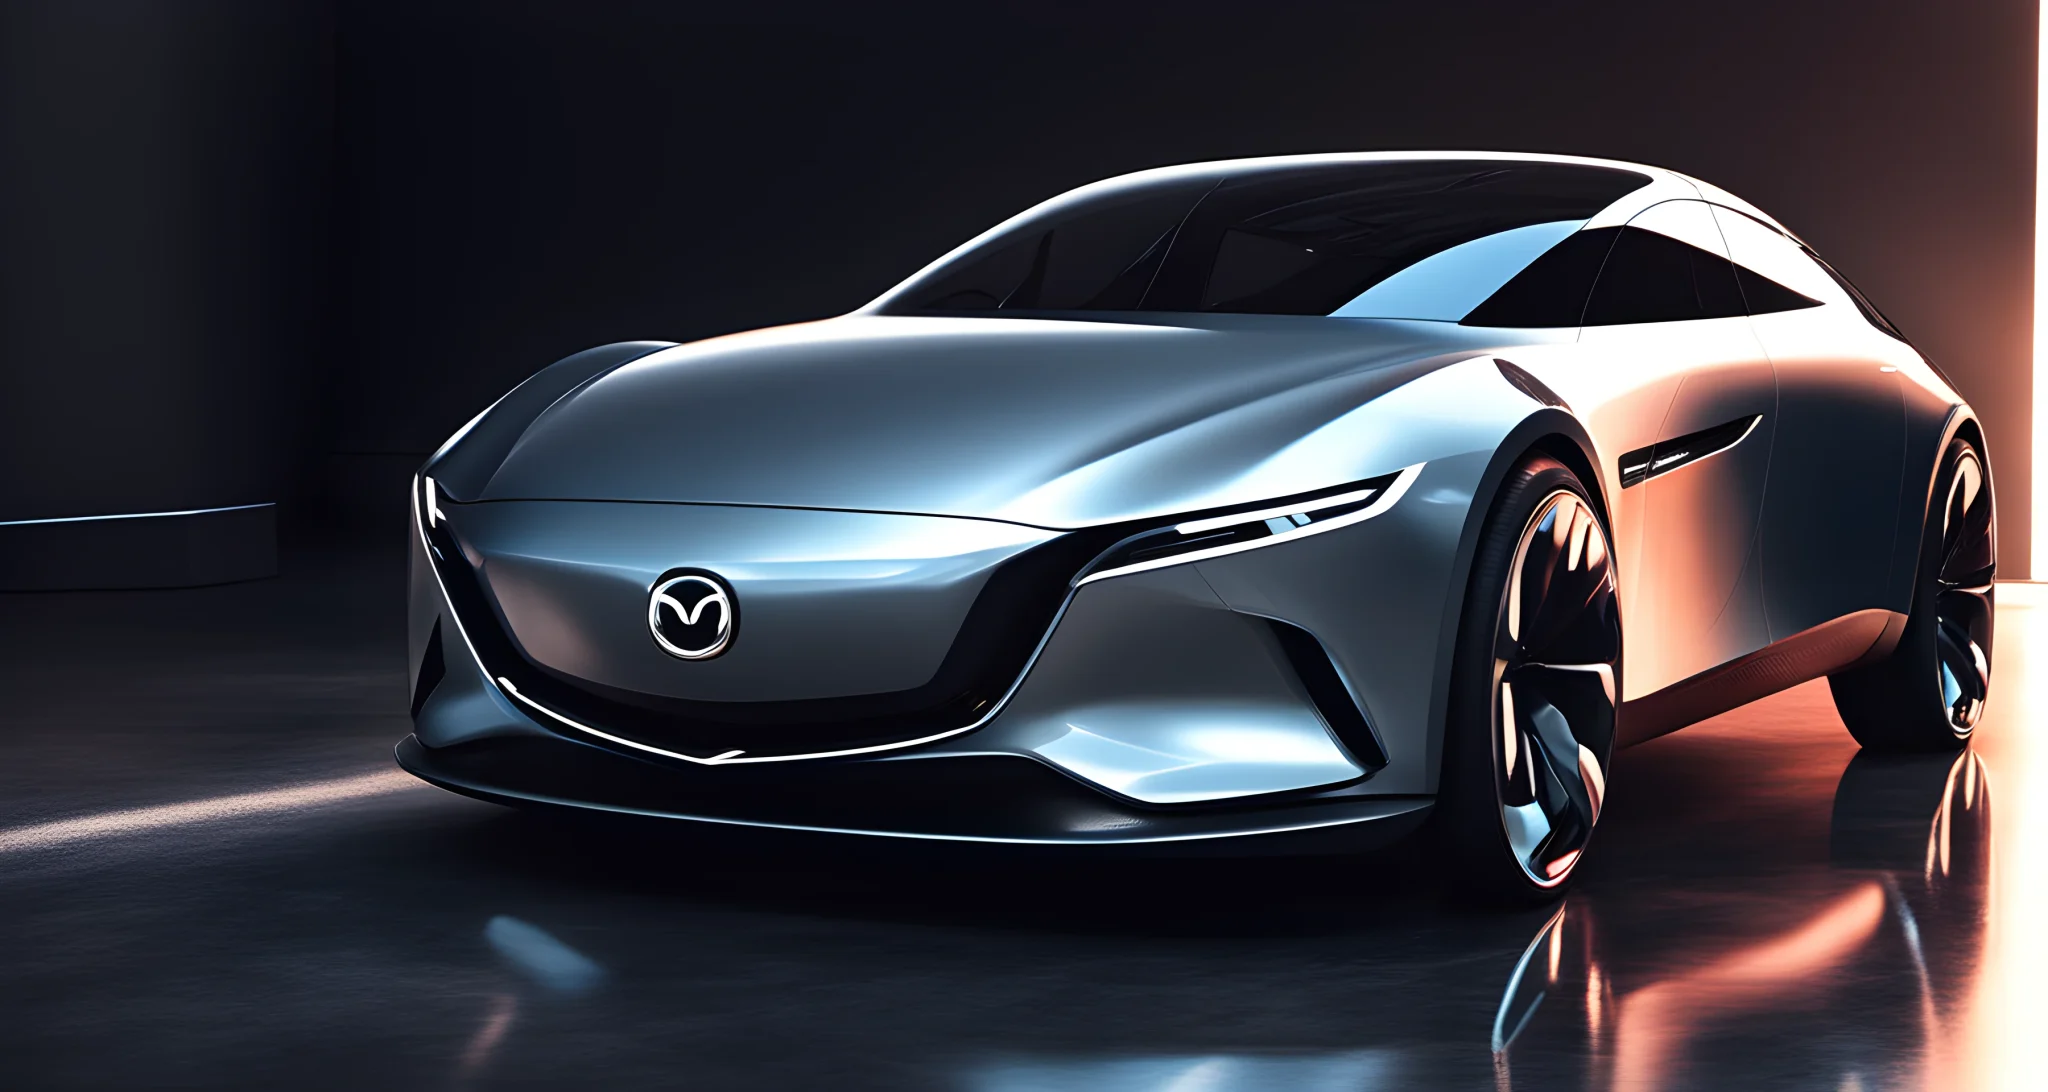 The image features a sleek, futuristic electric car concept with the Mazda SP logo prominently displayed on the front grille.